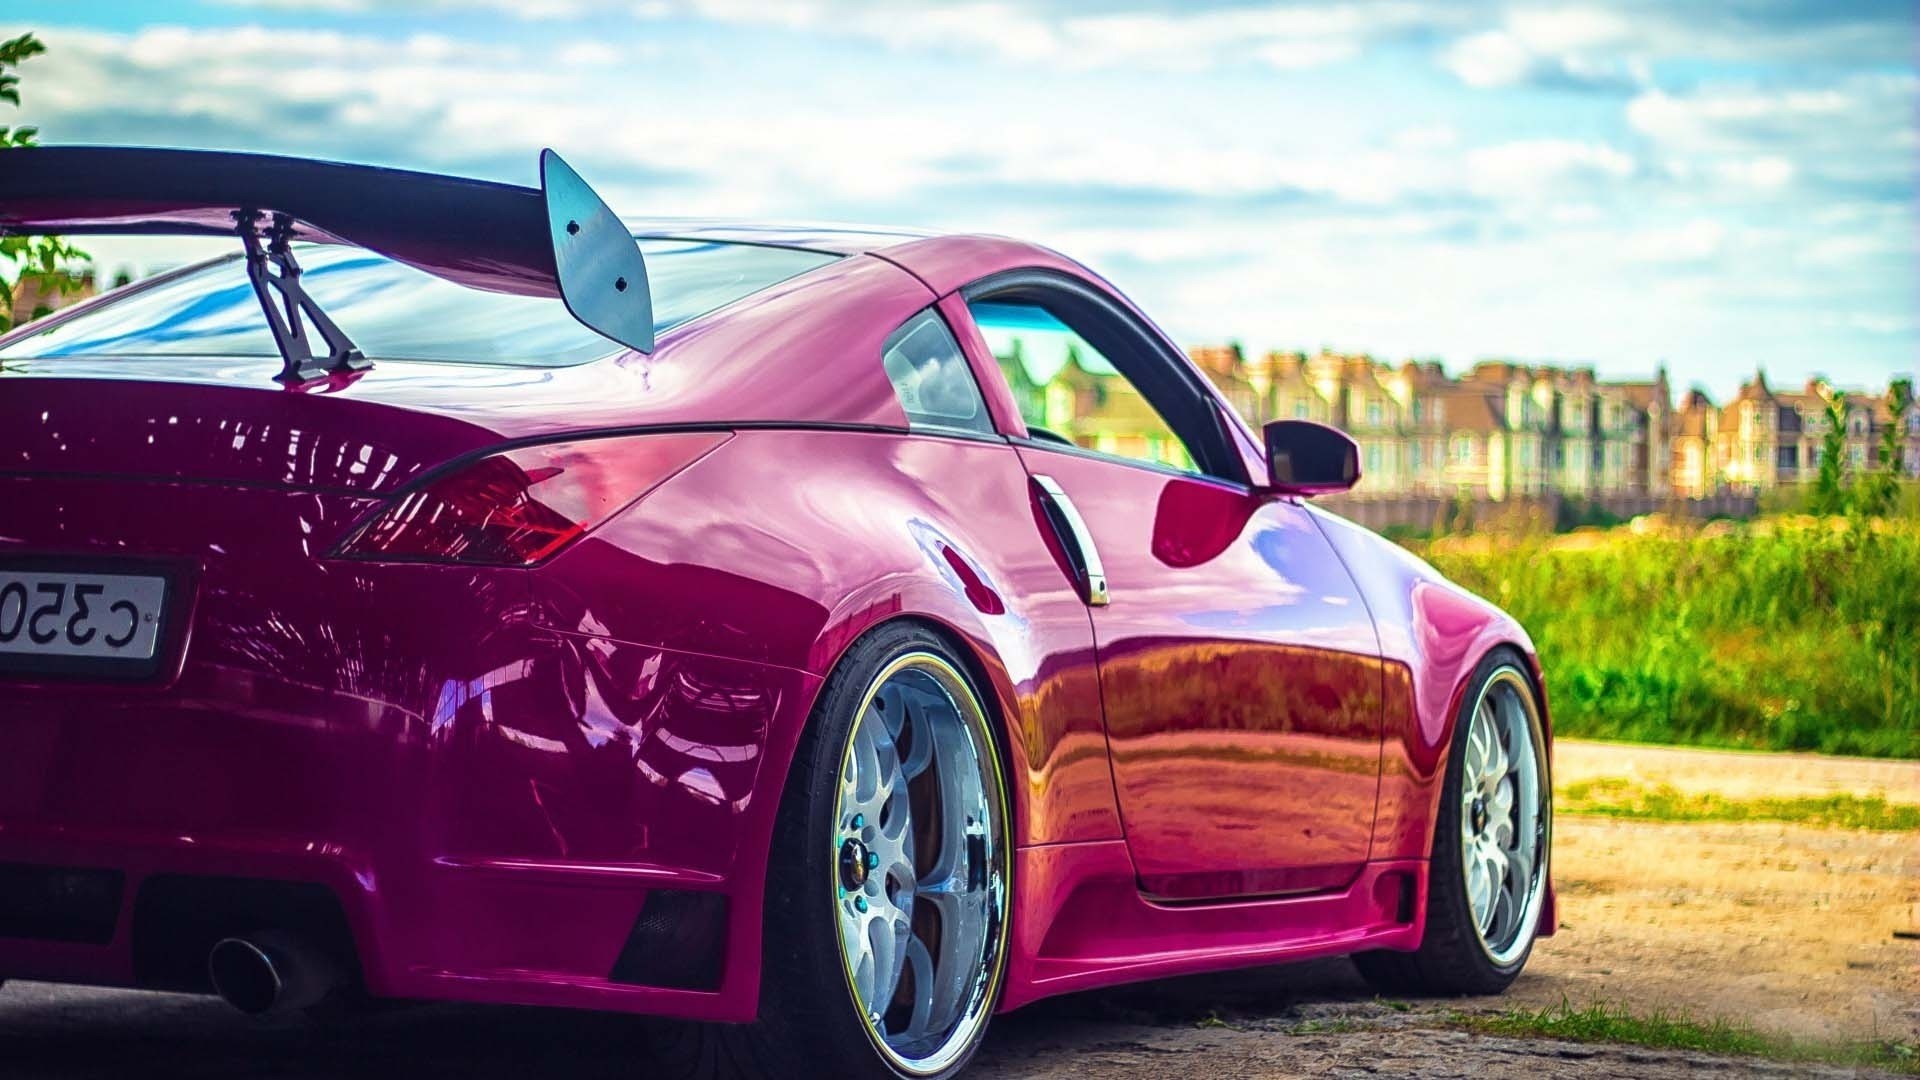 Pink Cars Wallpaper 80 images